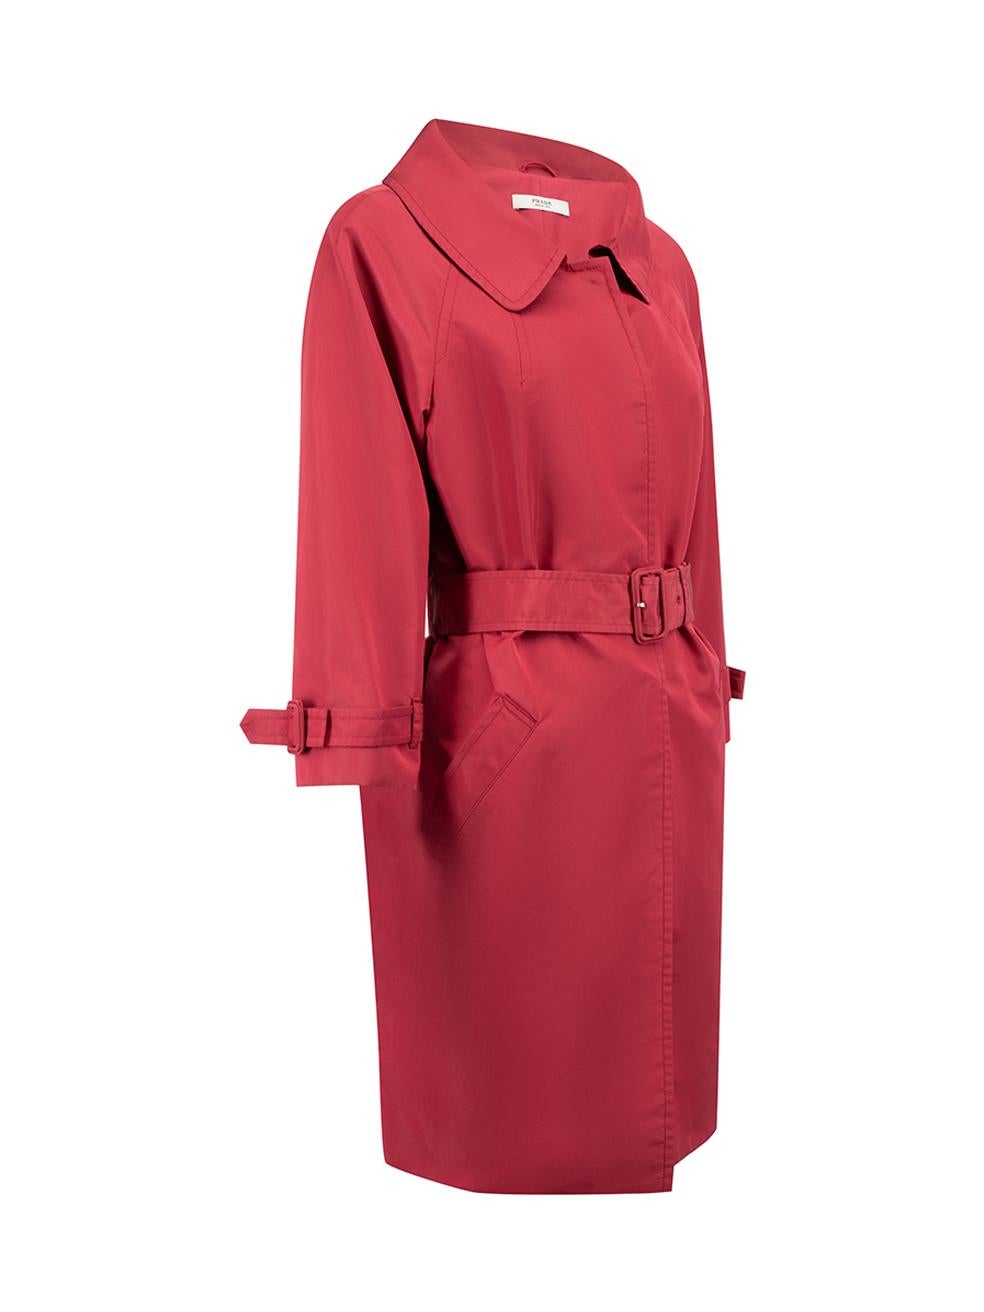 CONDITION is Good. Minor wear to coat is evident. Light wear to both cuffs with discolouration and both cuff buckles have become frayed on this used Prada designer resale item.



Details


Red

Silk

Mid length coat

Front snap button closure

3/4